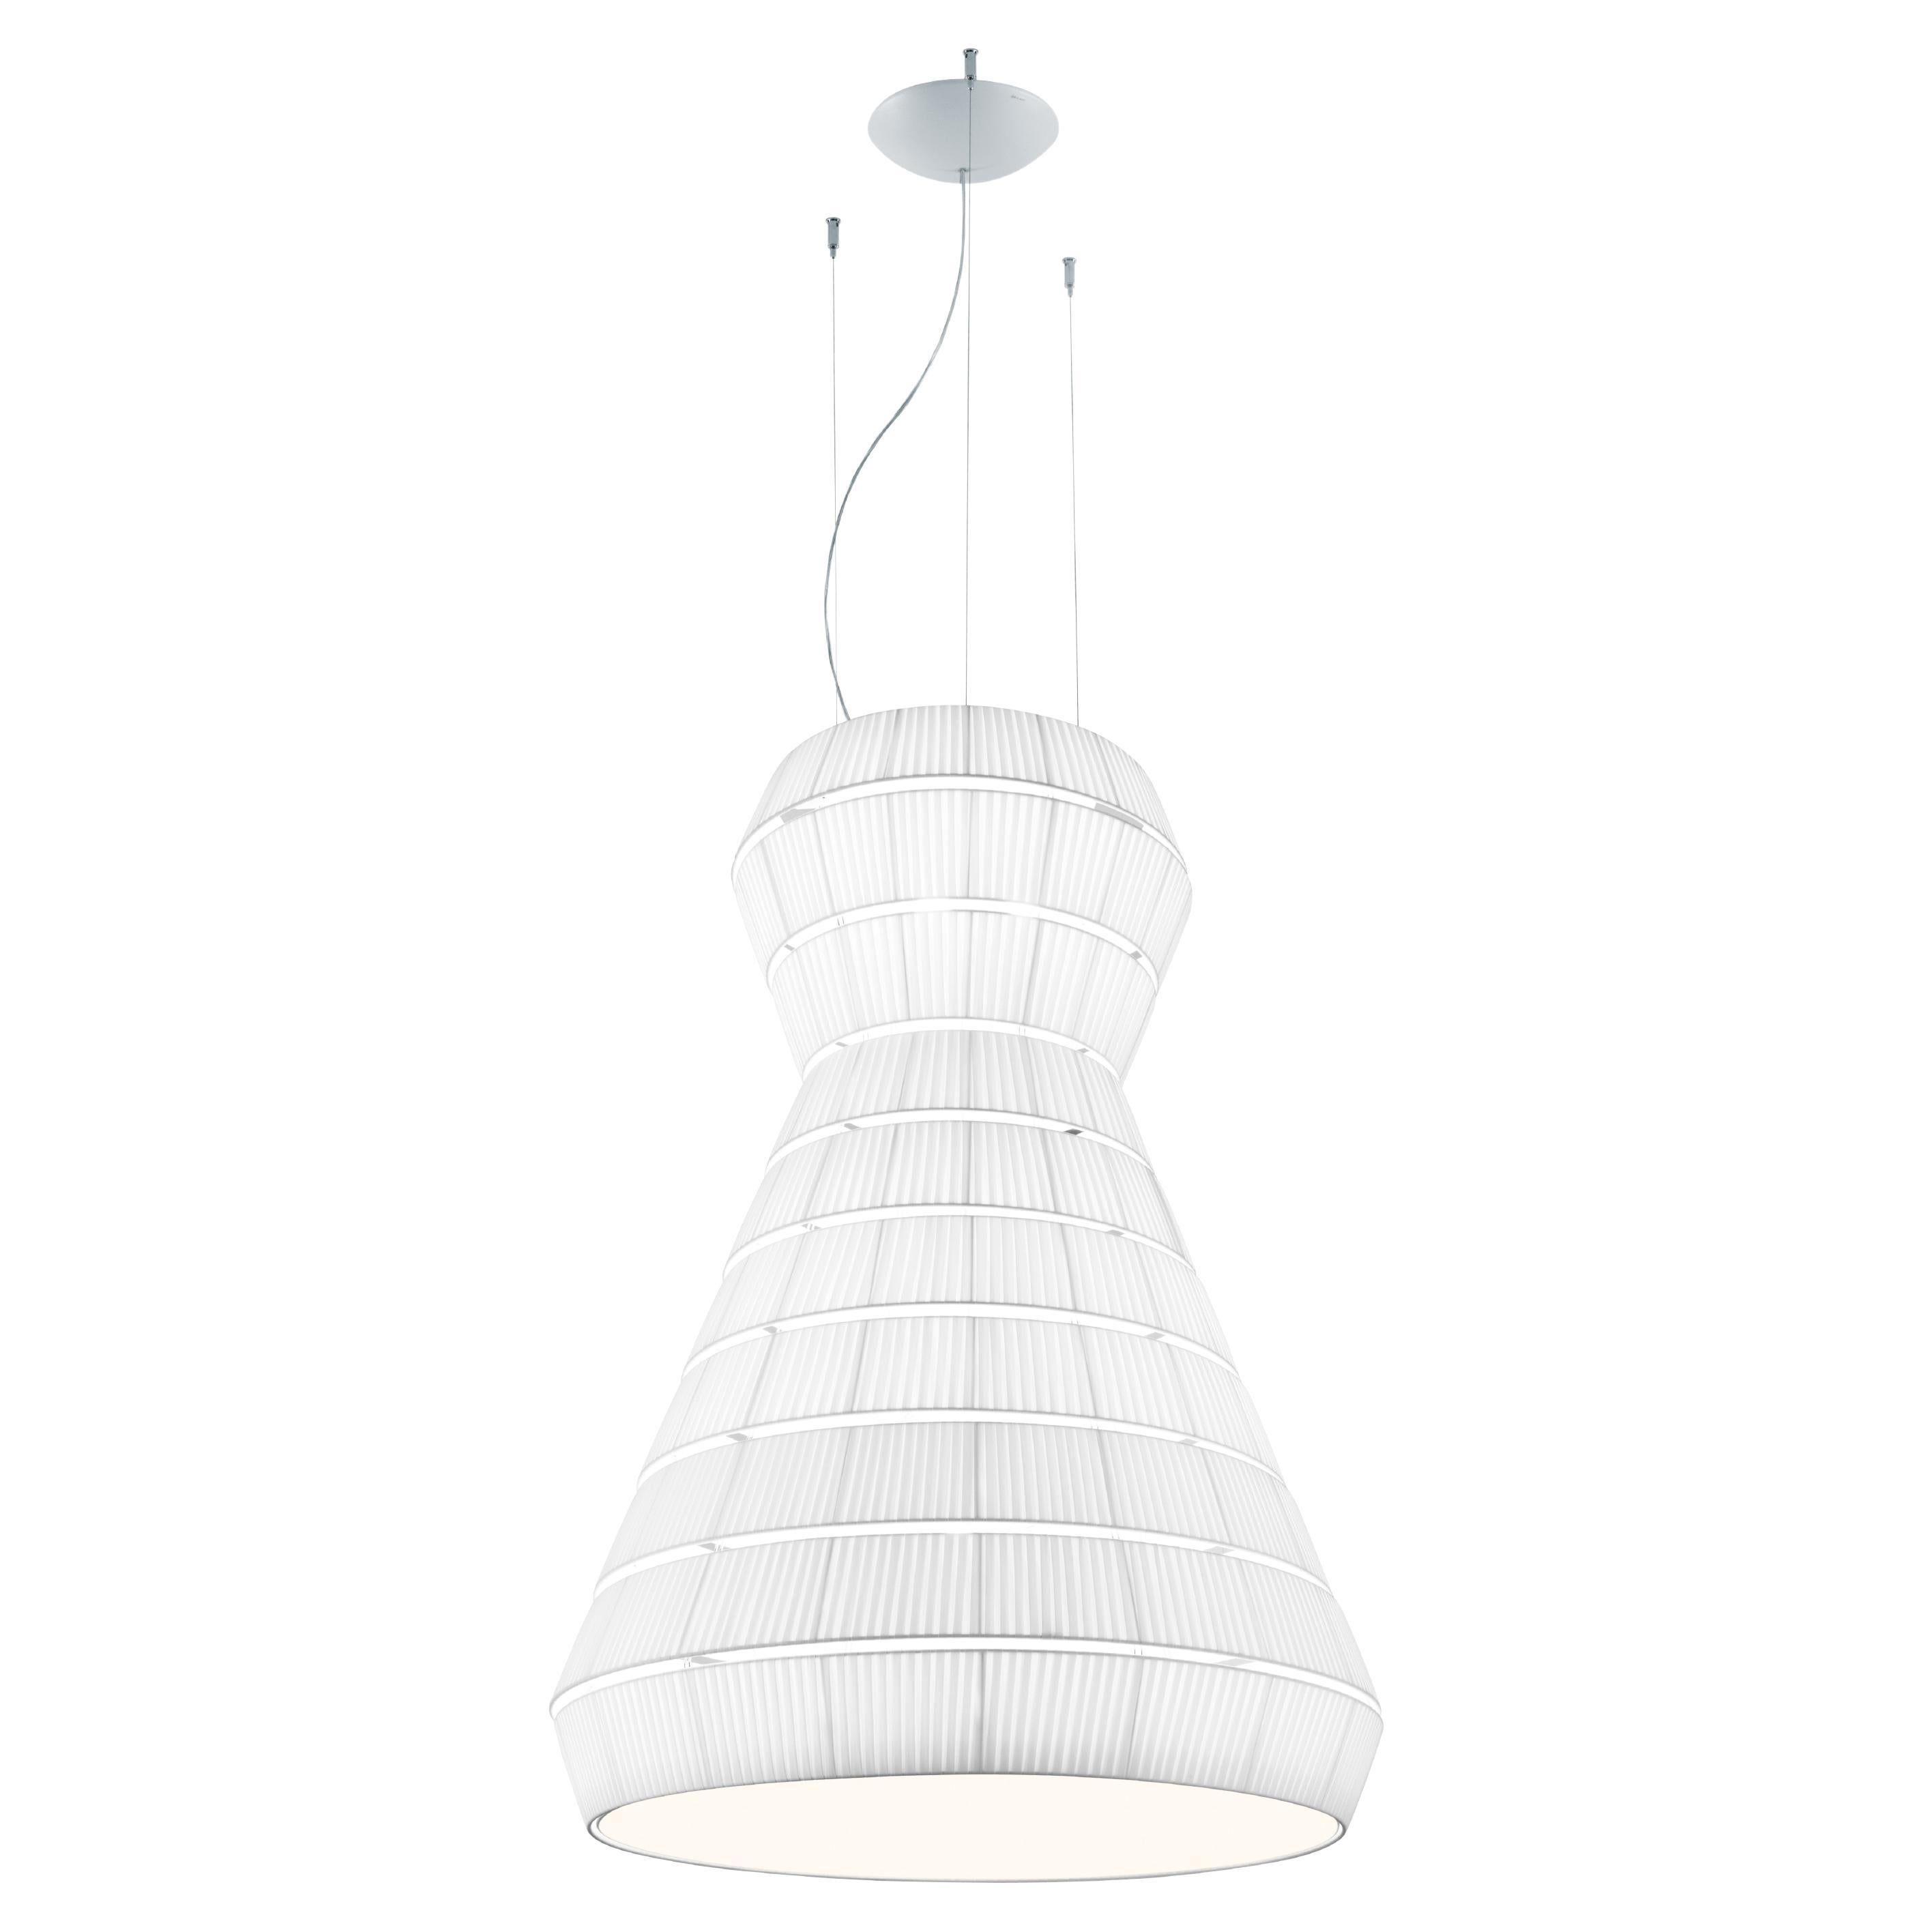 Axolight Layers Type A Pendant Lamp in White Steel by Vanessa Vivian For Sale